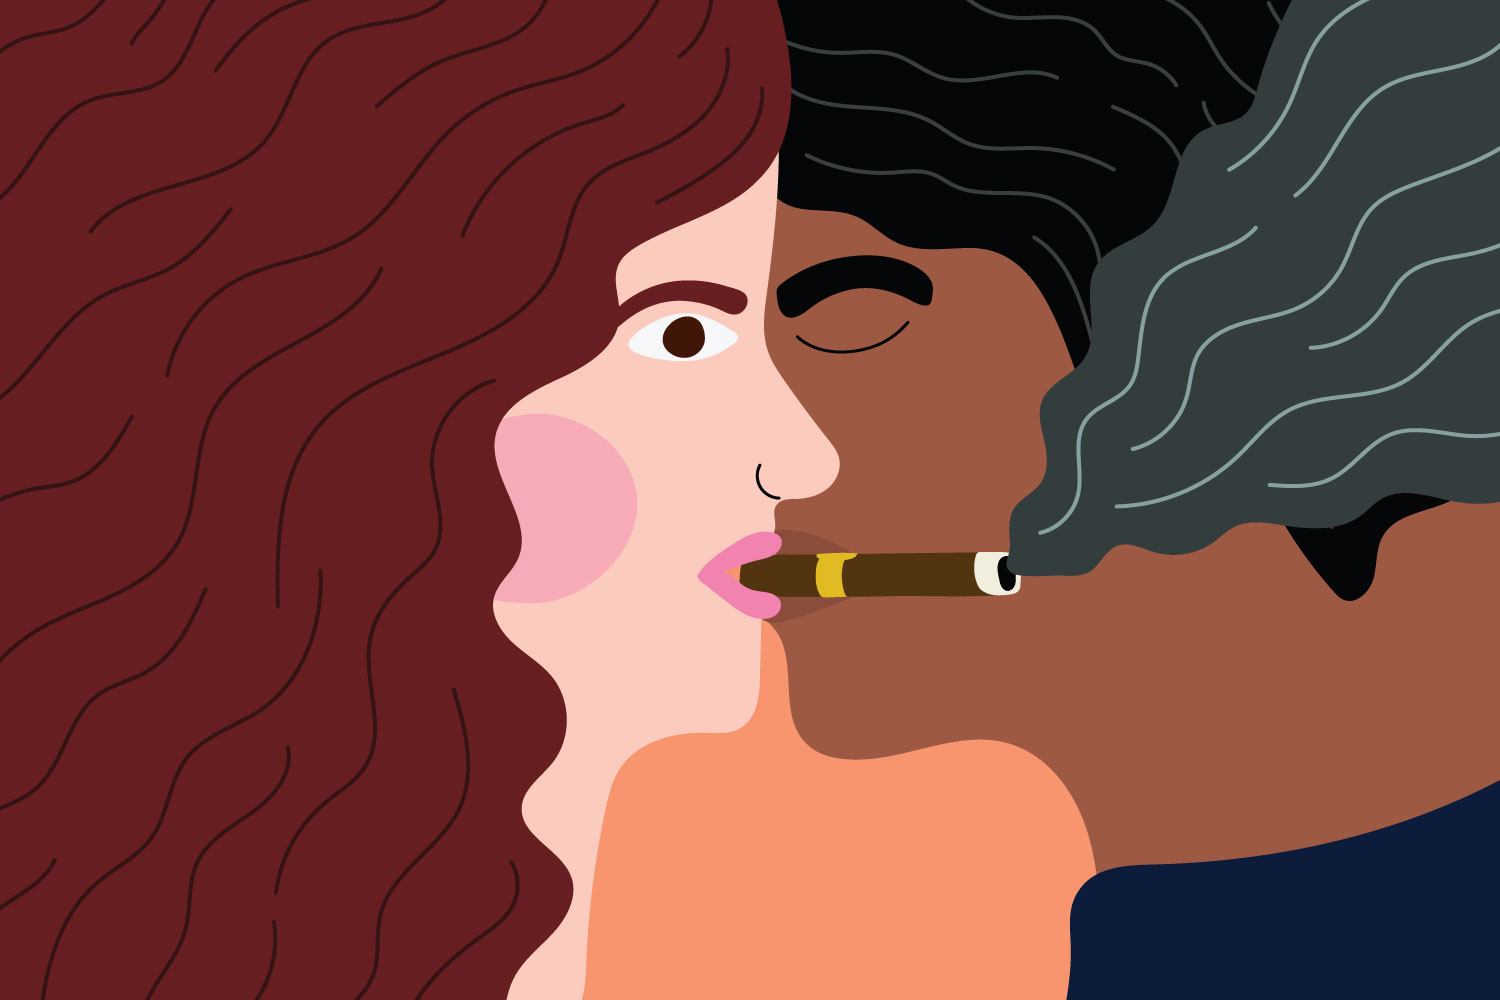 illustration shows a woman and man in an embrace, the woman has a cigar in her mouth